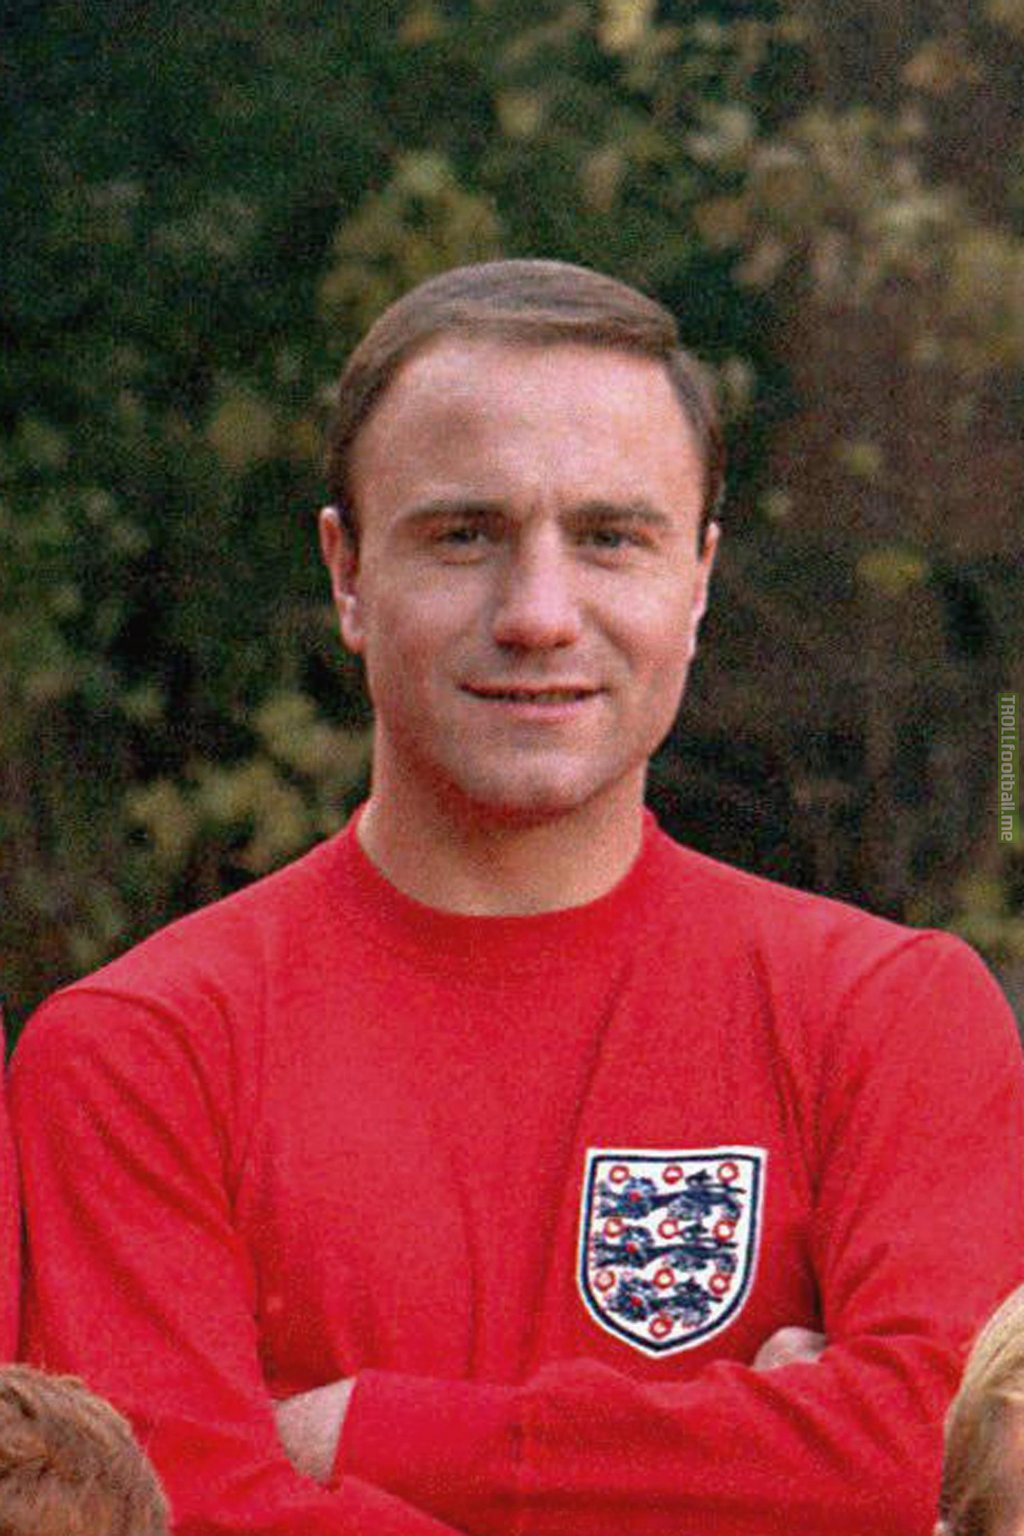 George Best described George Cohen as "the best full back I ever played against”. Cohen has died at the age of 83. He played every minute of the 1966 World Cup and was vice-captain in the final. His passing leaves only Bobby Charlton and Geoff Hurst as survivors from England's victorious '66 side.